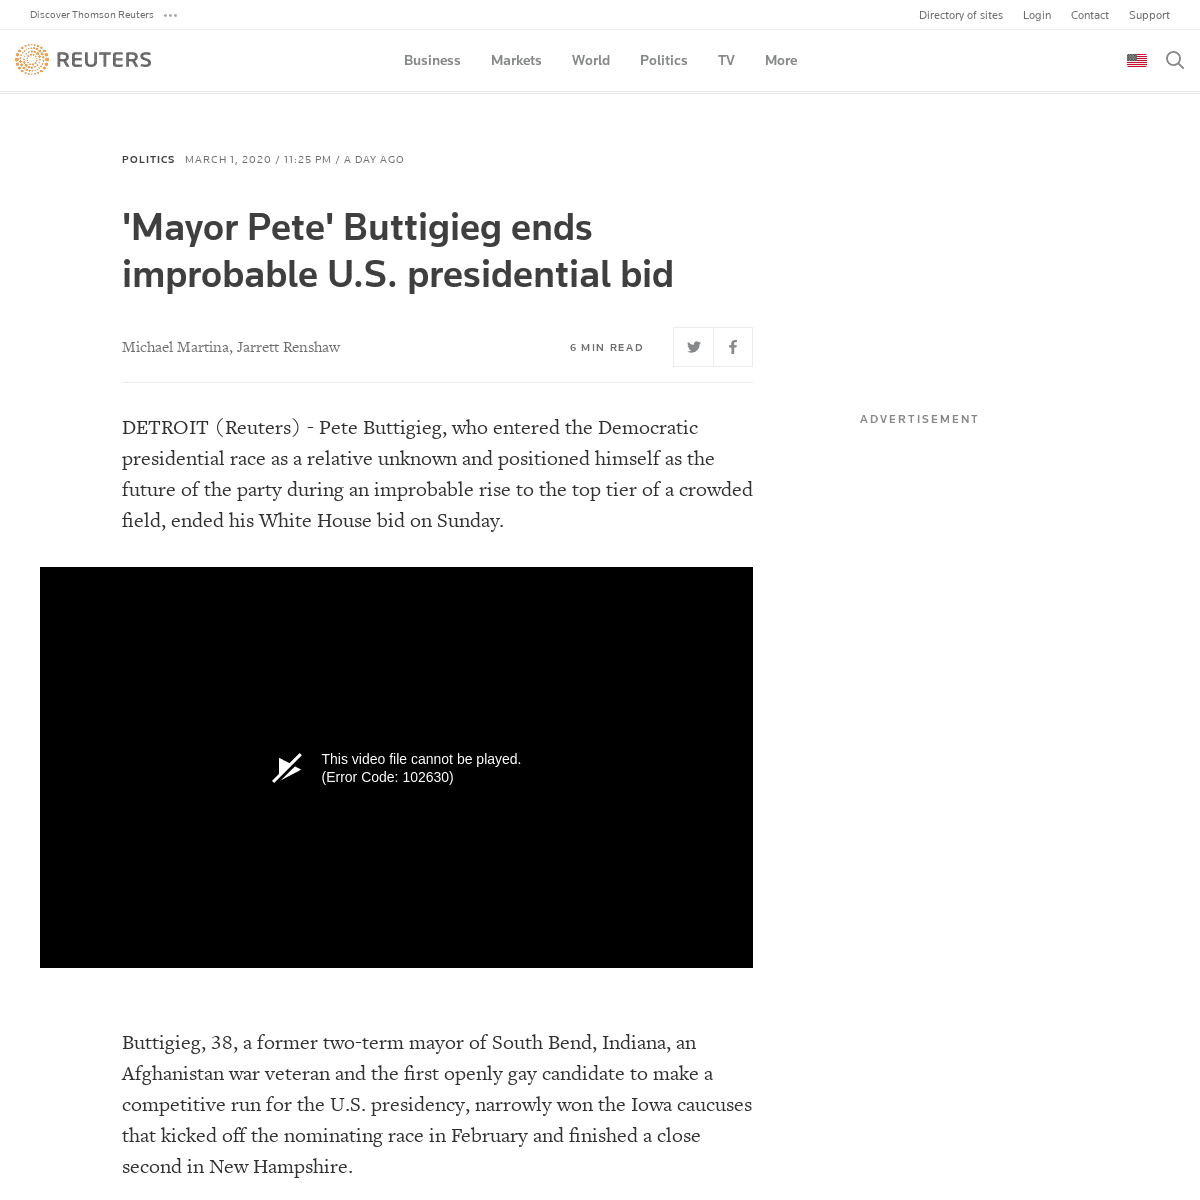 A complete backup of www.reuters.com/article/us-usa-election-buttigieg/pete-buttigieg-to-end-white-house-bid-after-improbable-ri